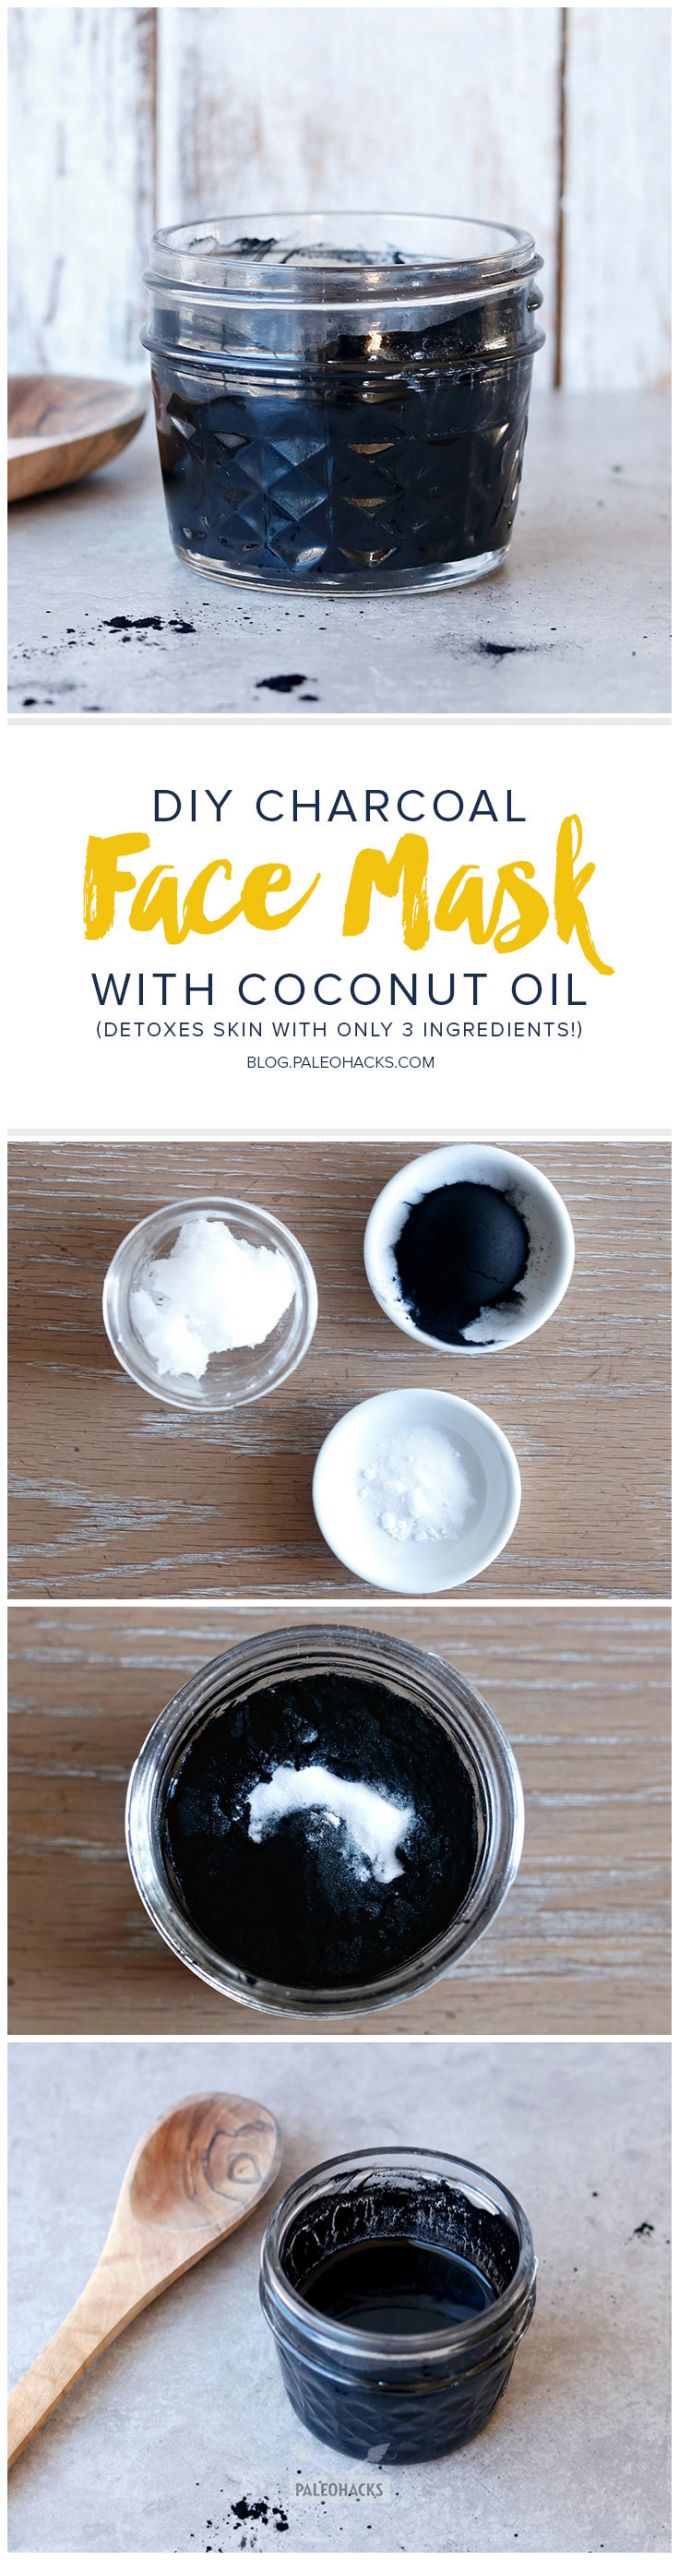 Charcoal Face Mask DIY
 DIY Charcoal Face Mask with Coconut Oil ly 3 Ingre nts